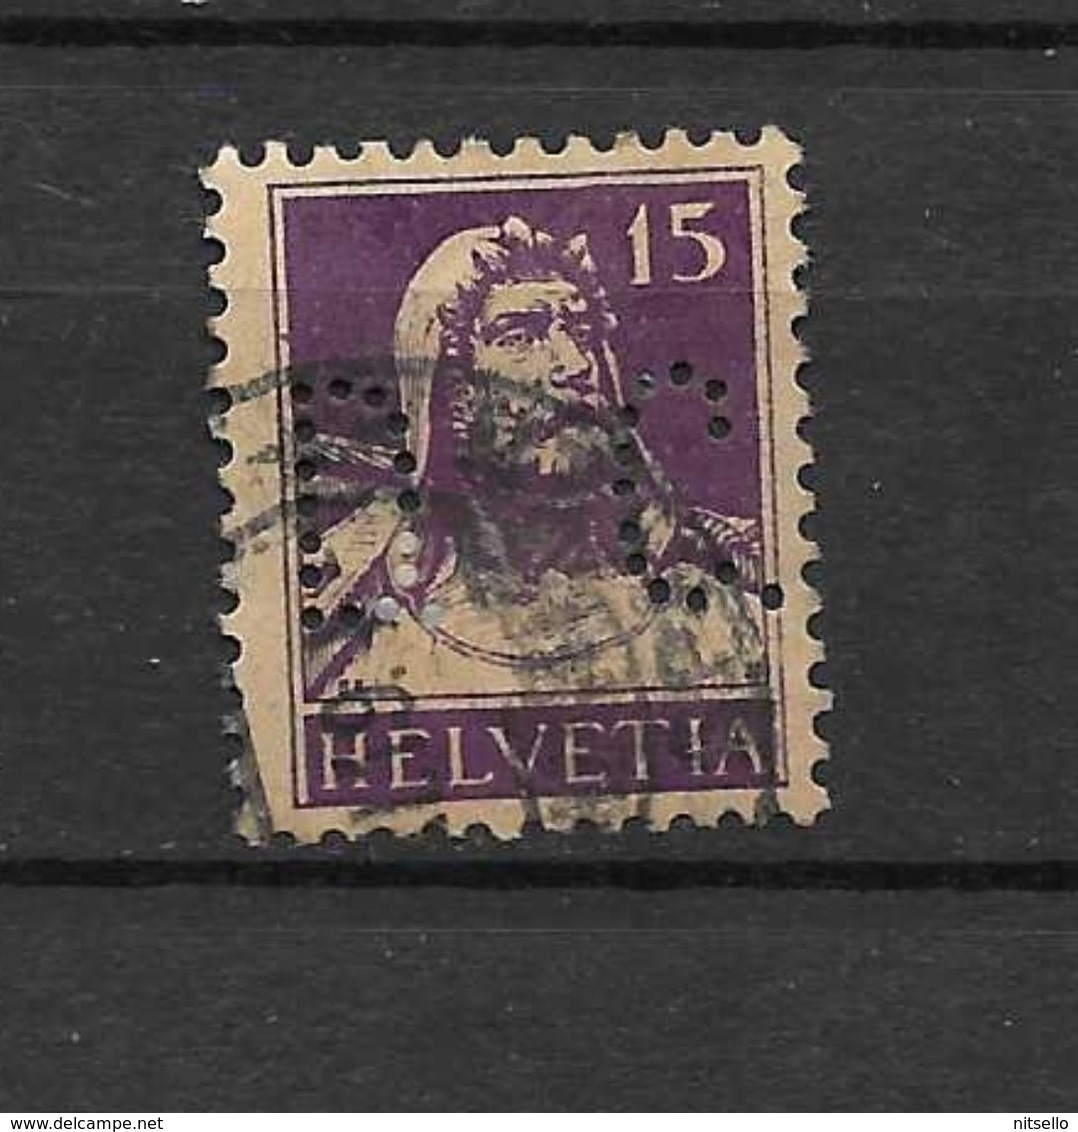 LOTE 1576  ///  SUIZA  1914     YVERT Nº: 141  CON PERFORACION COMERCIAL    ¡¡¡¡¡ LIQUIDATION !!!!!!! - Unused Stamps